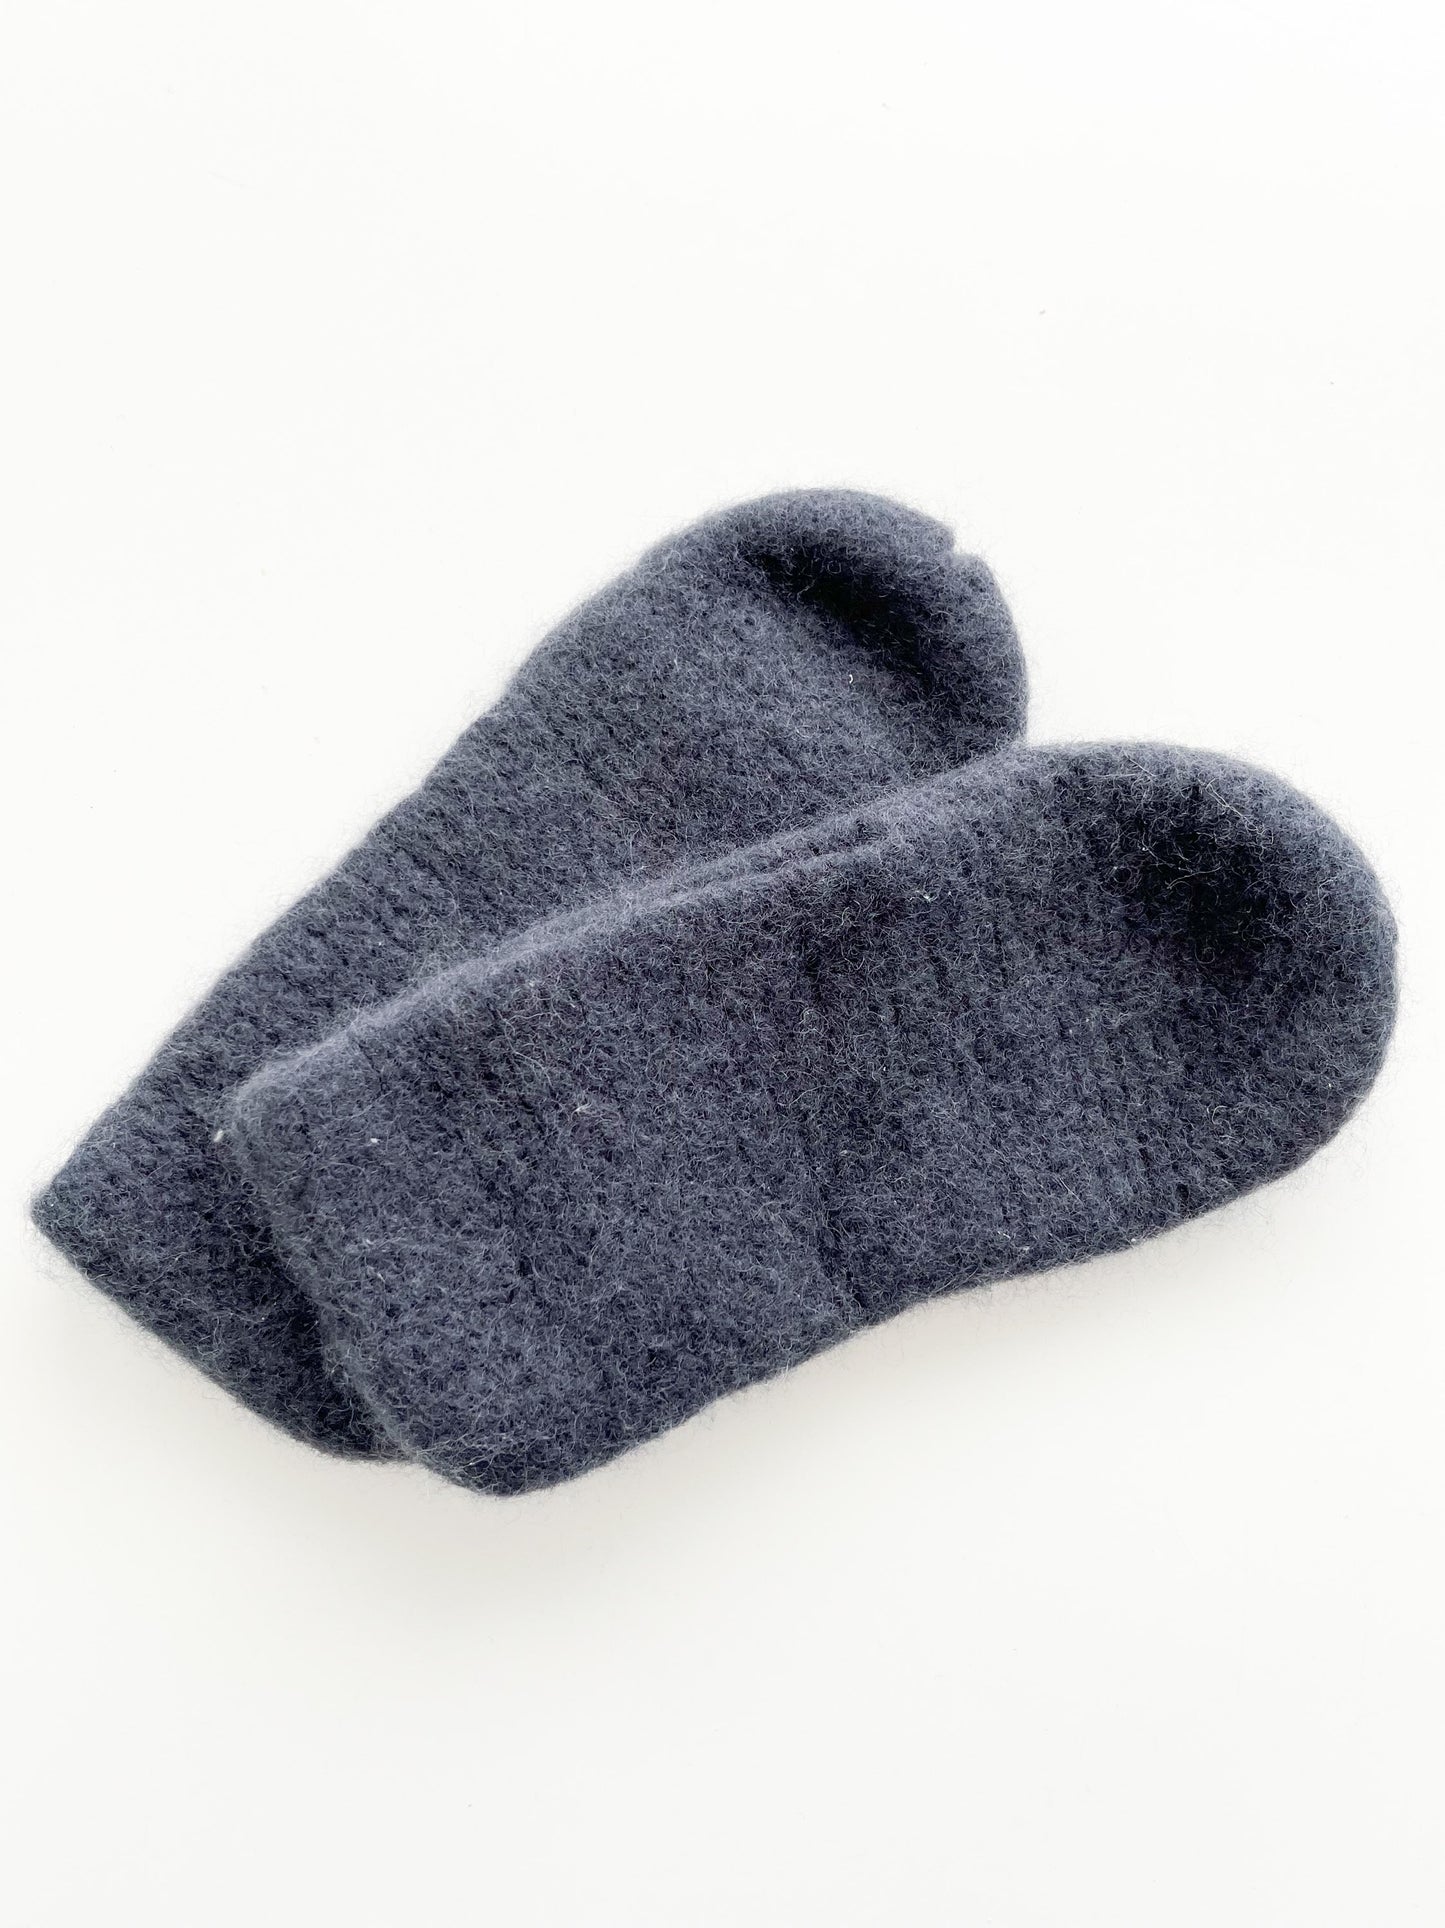 Soft Navy Wool Slippers